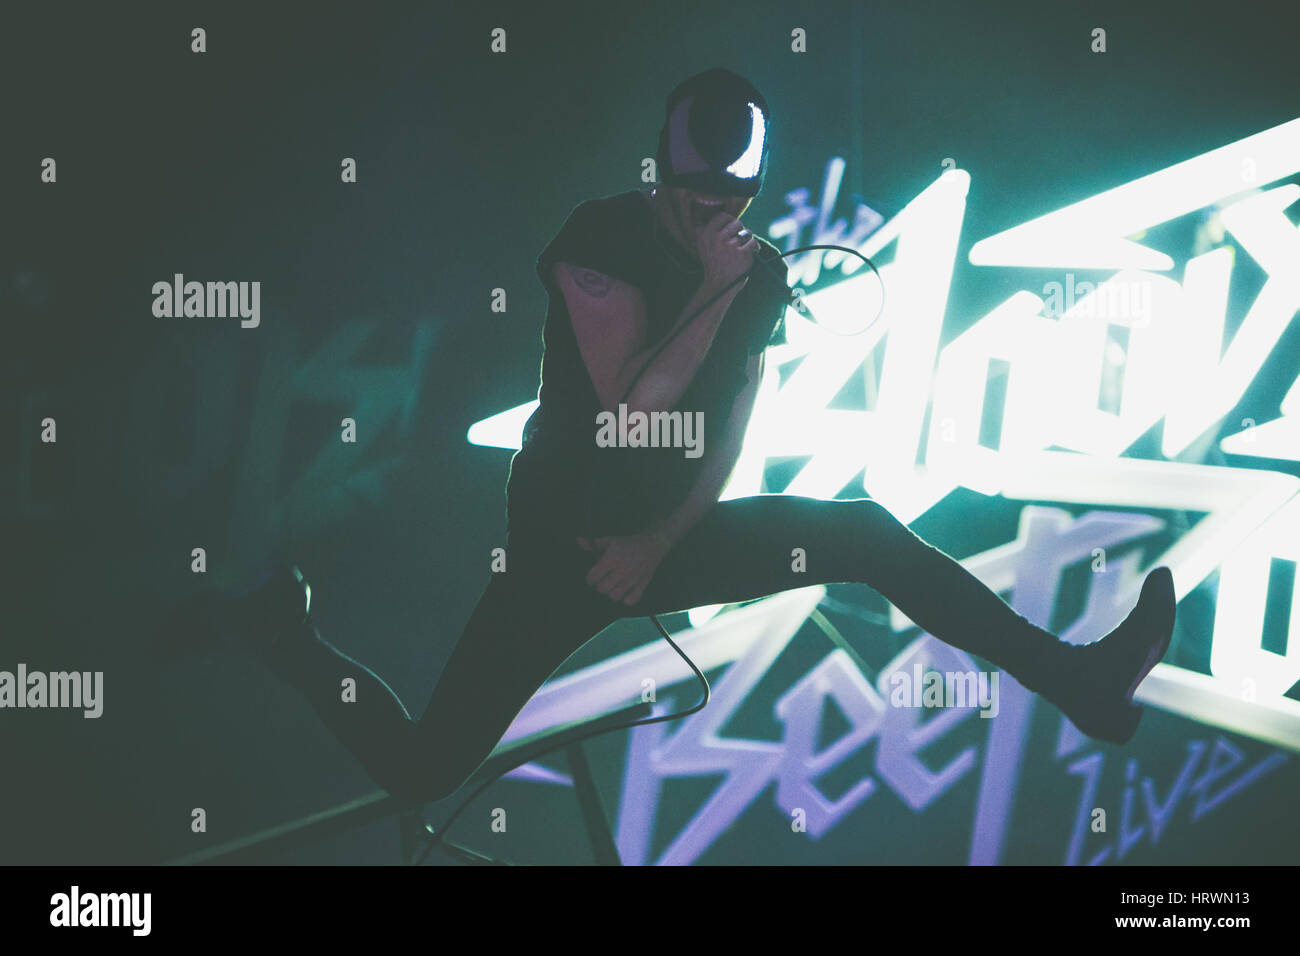 July 5, 2014: The Bloody Beetroots ( also known as Sir Bob Cornelius Rifo,  real name Simone